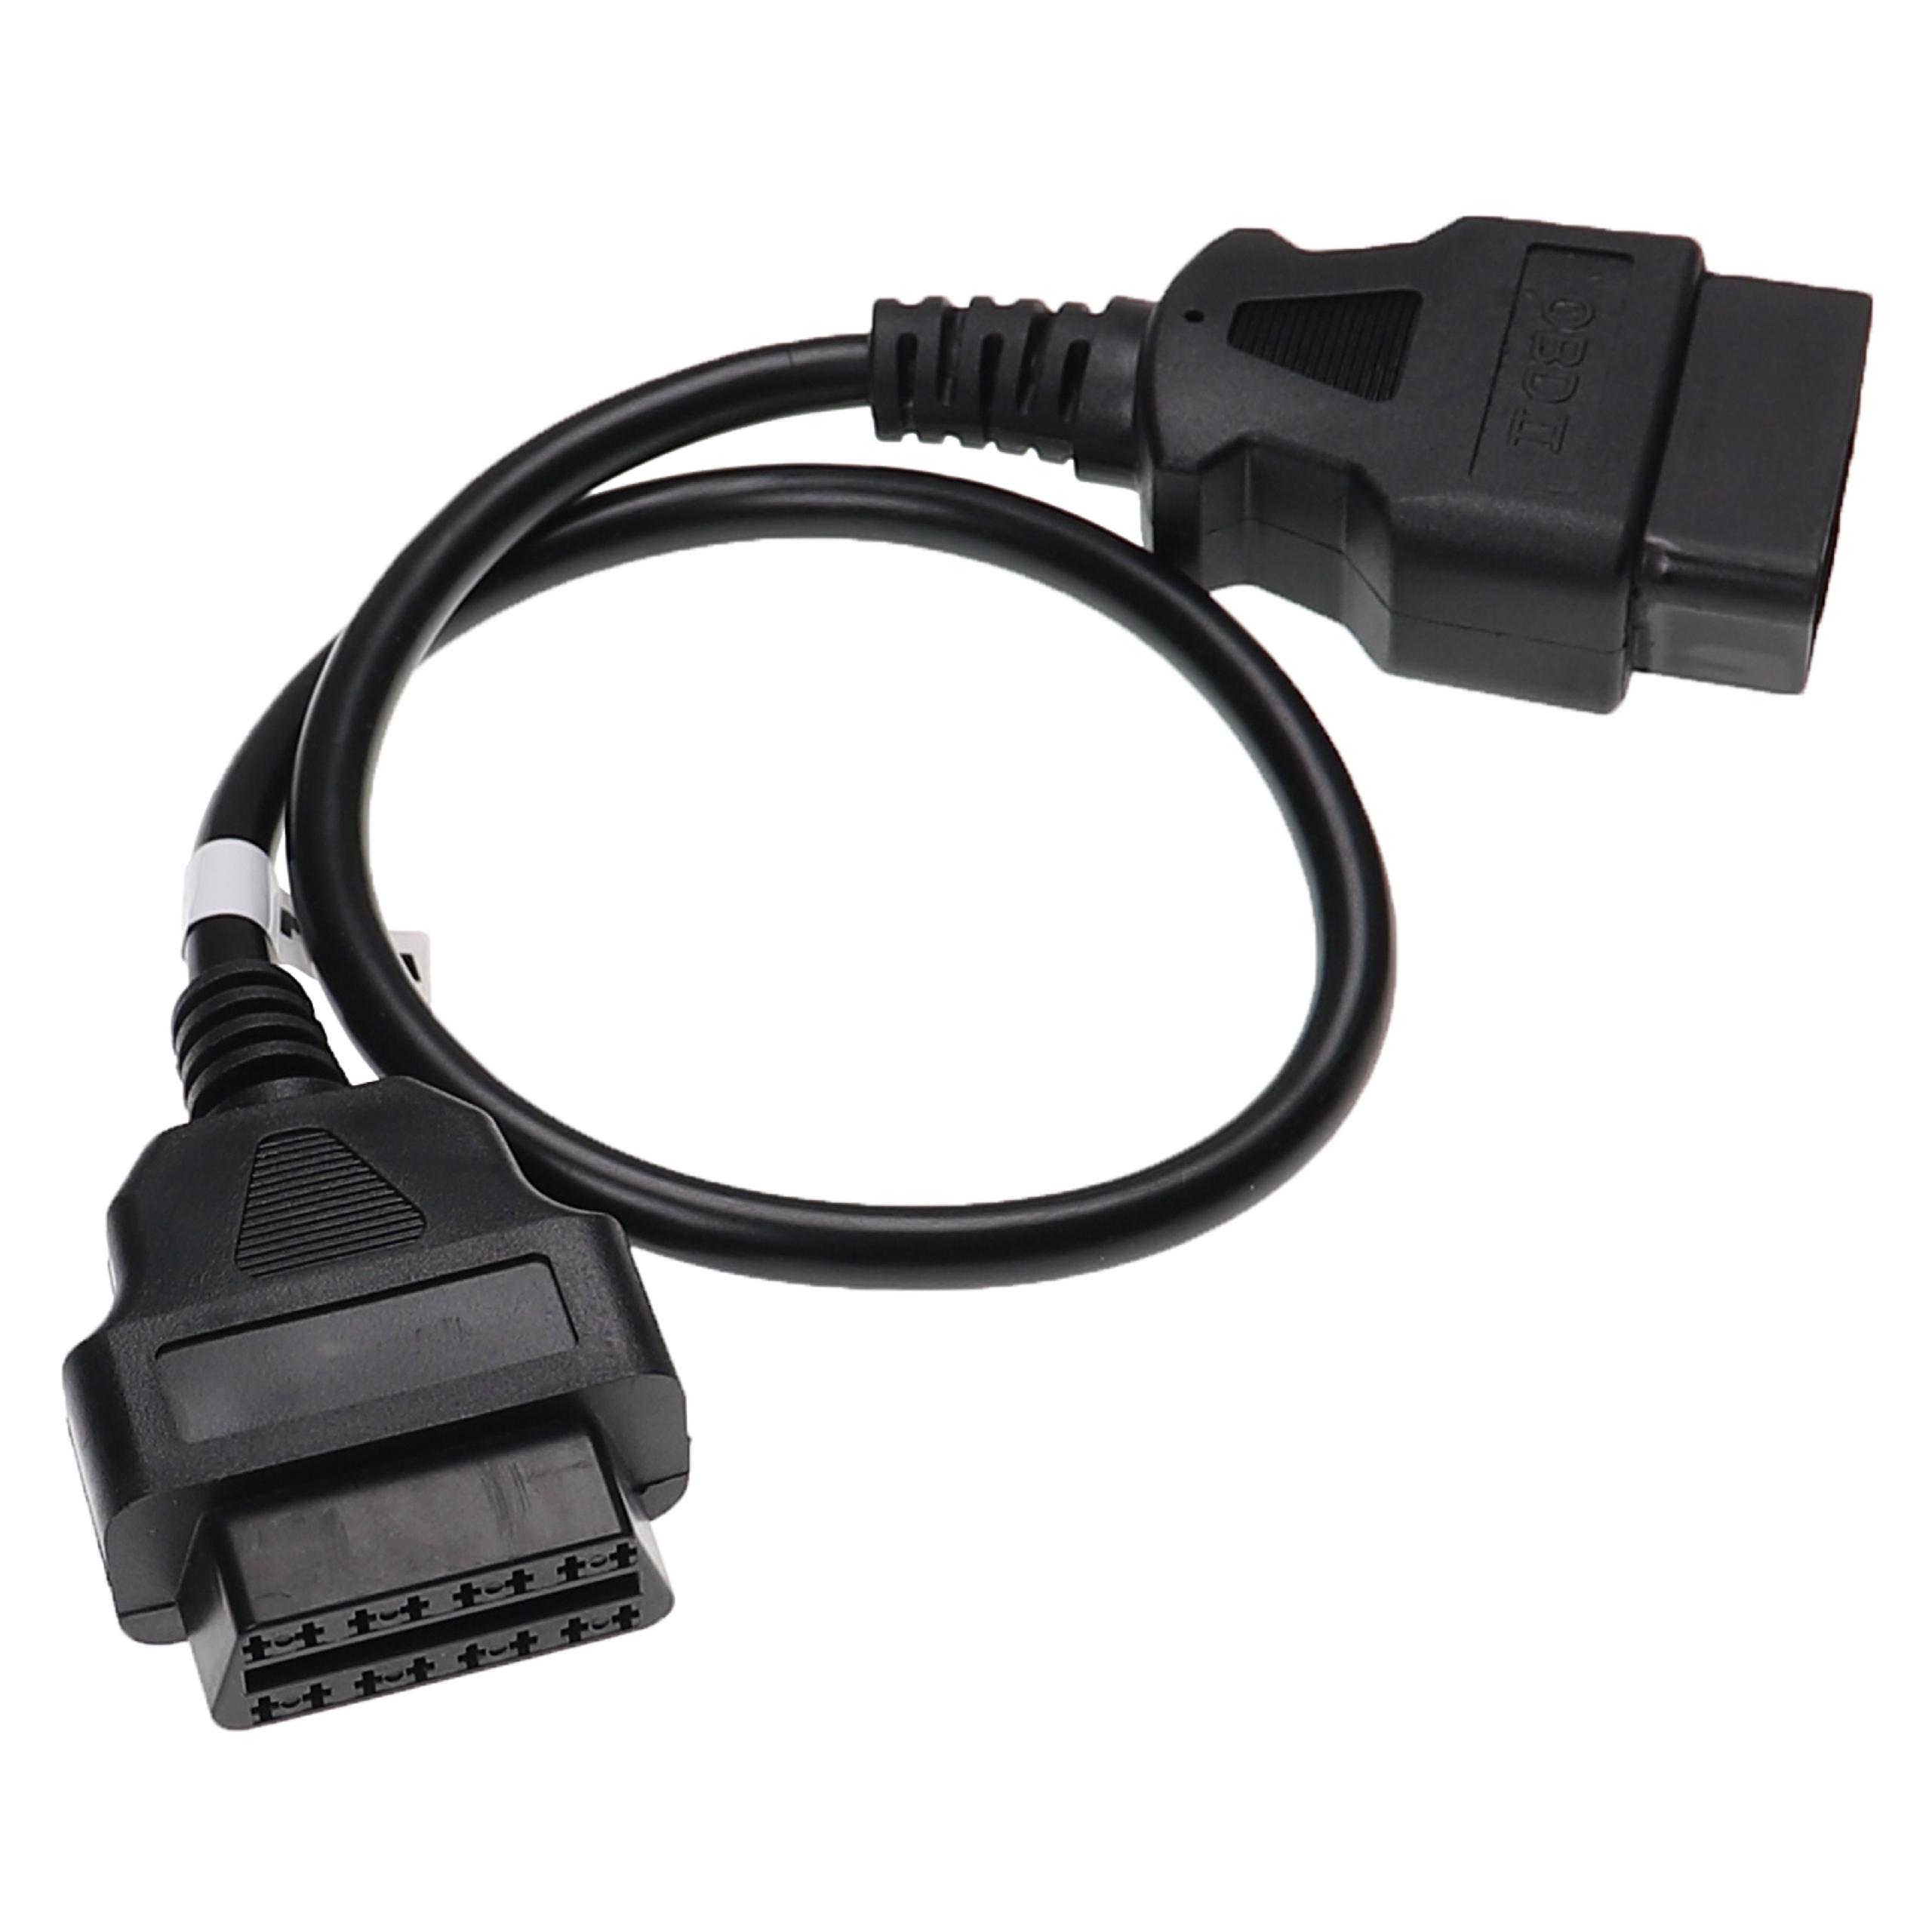 vhbw OBD2 Extension Cable 16 Pin (f) to 16 Pin (m) for LKW, Car, Vehicle - 50 cm